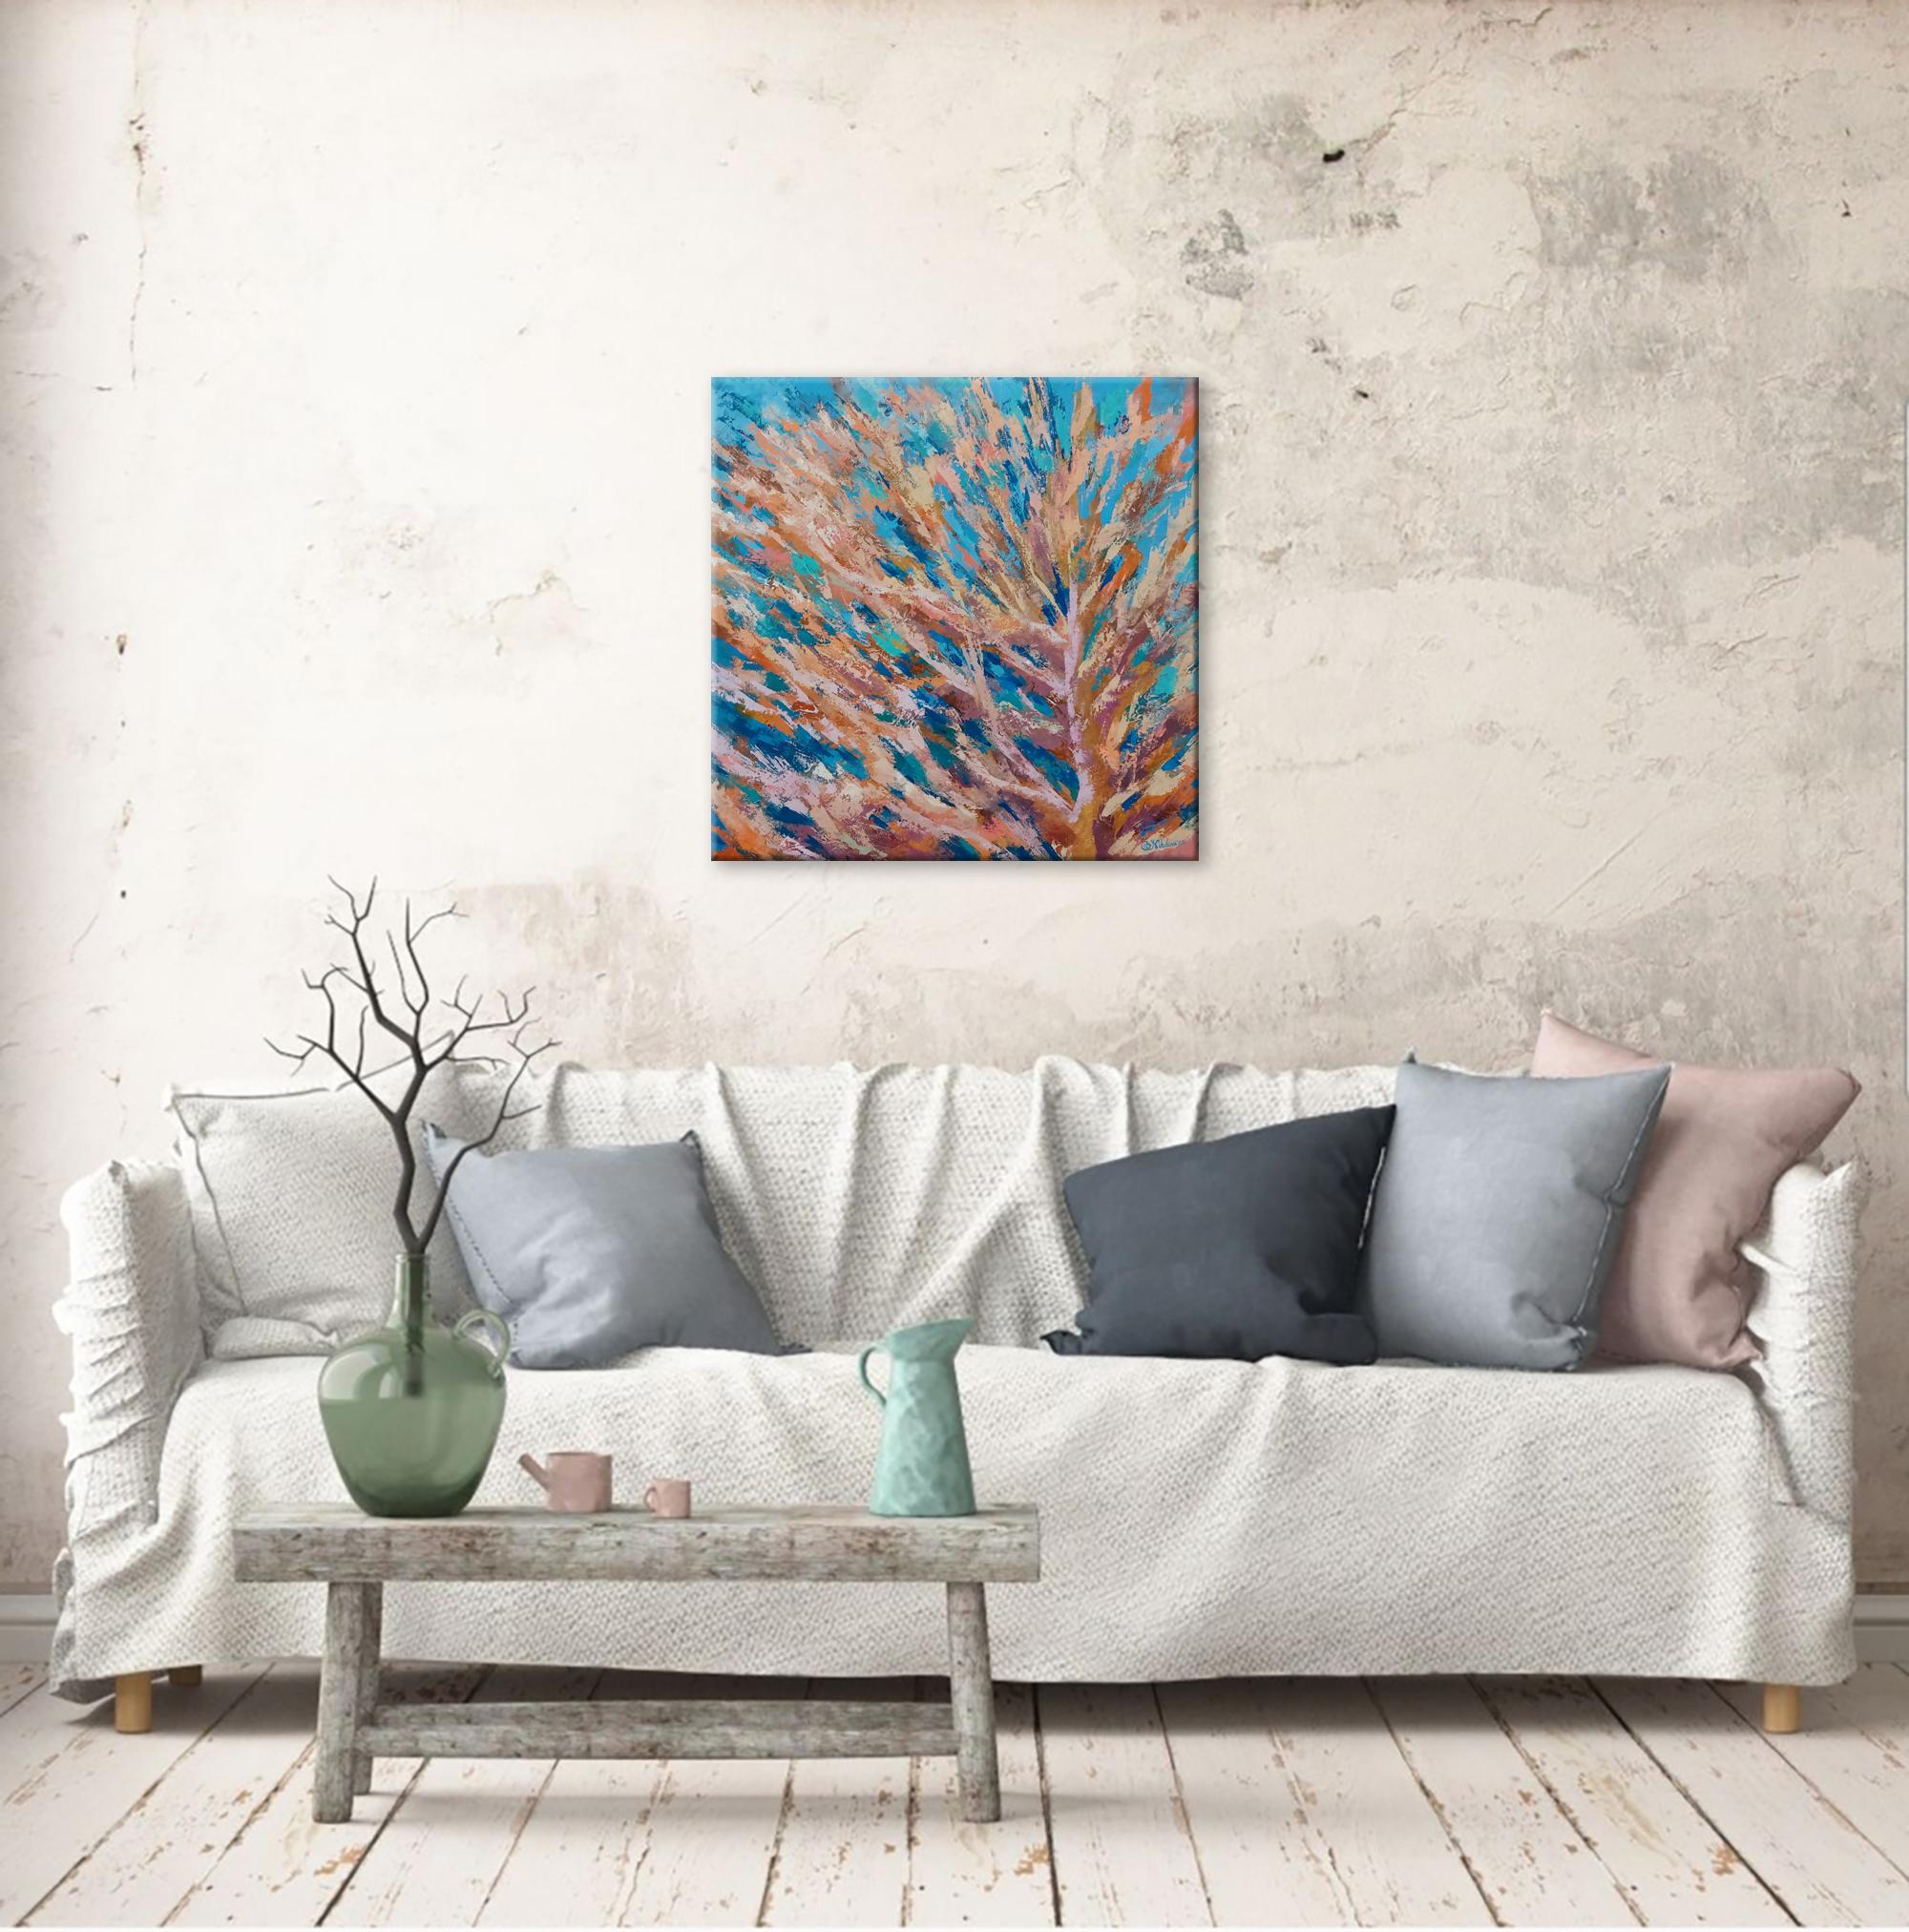 Soft Pink Coral Ocean Art  - Abstract Impressionist Painting by Olga Nikitina